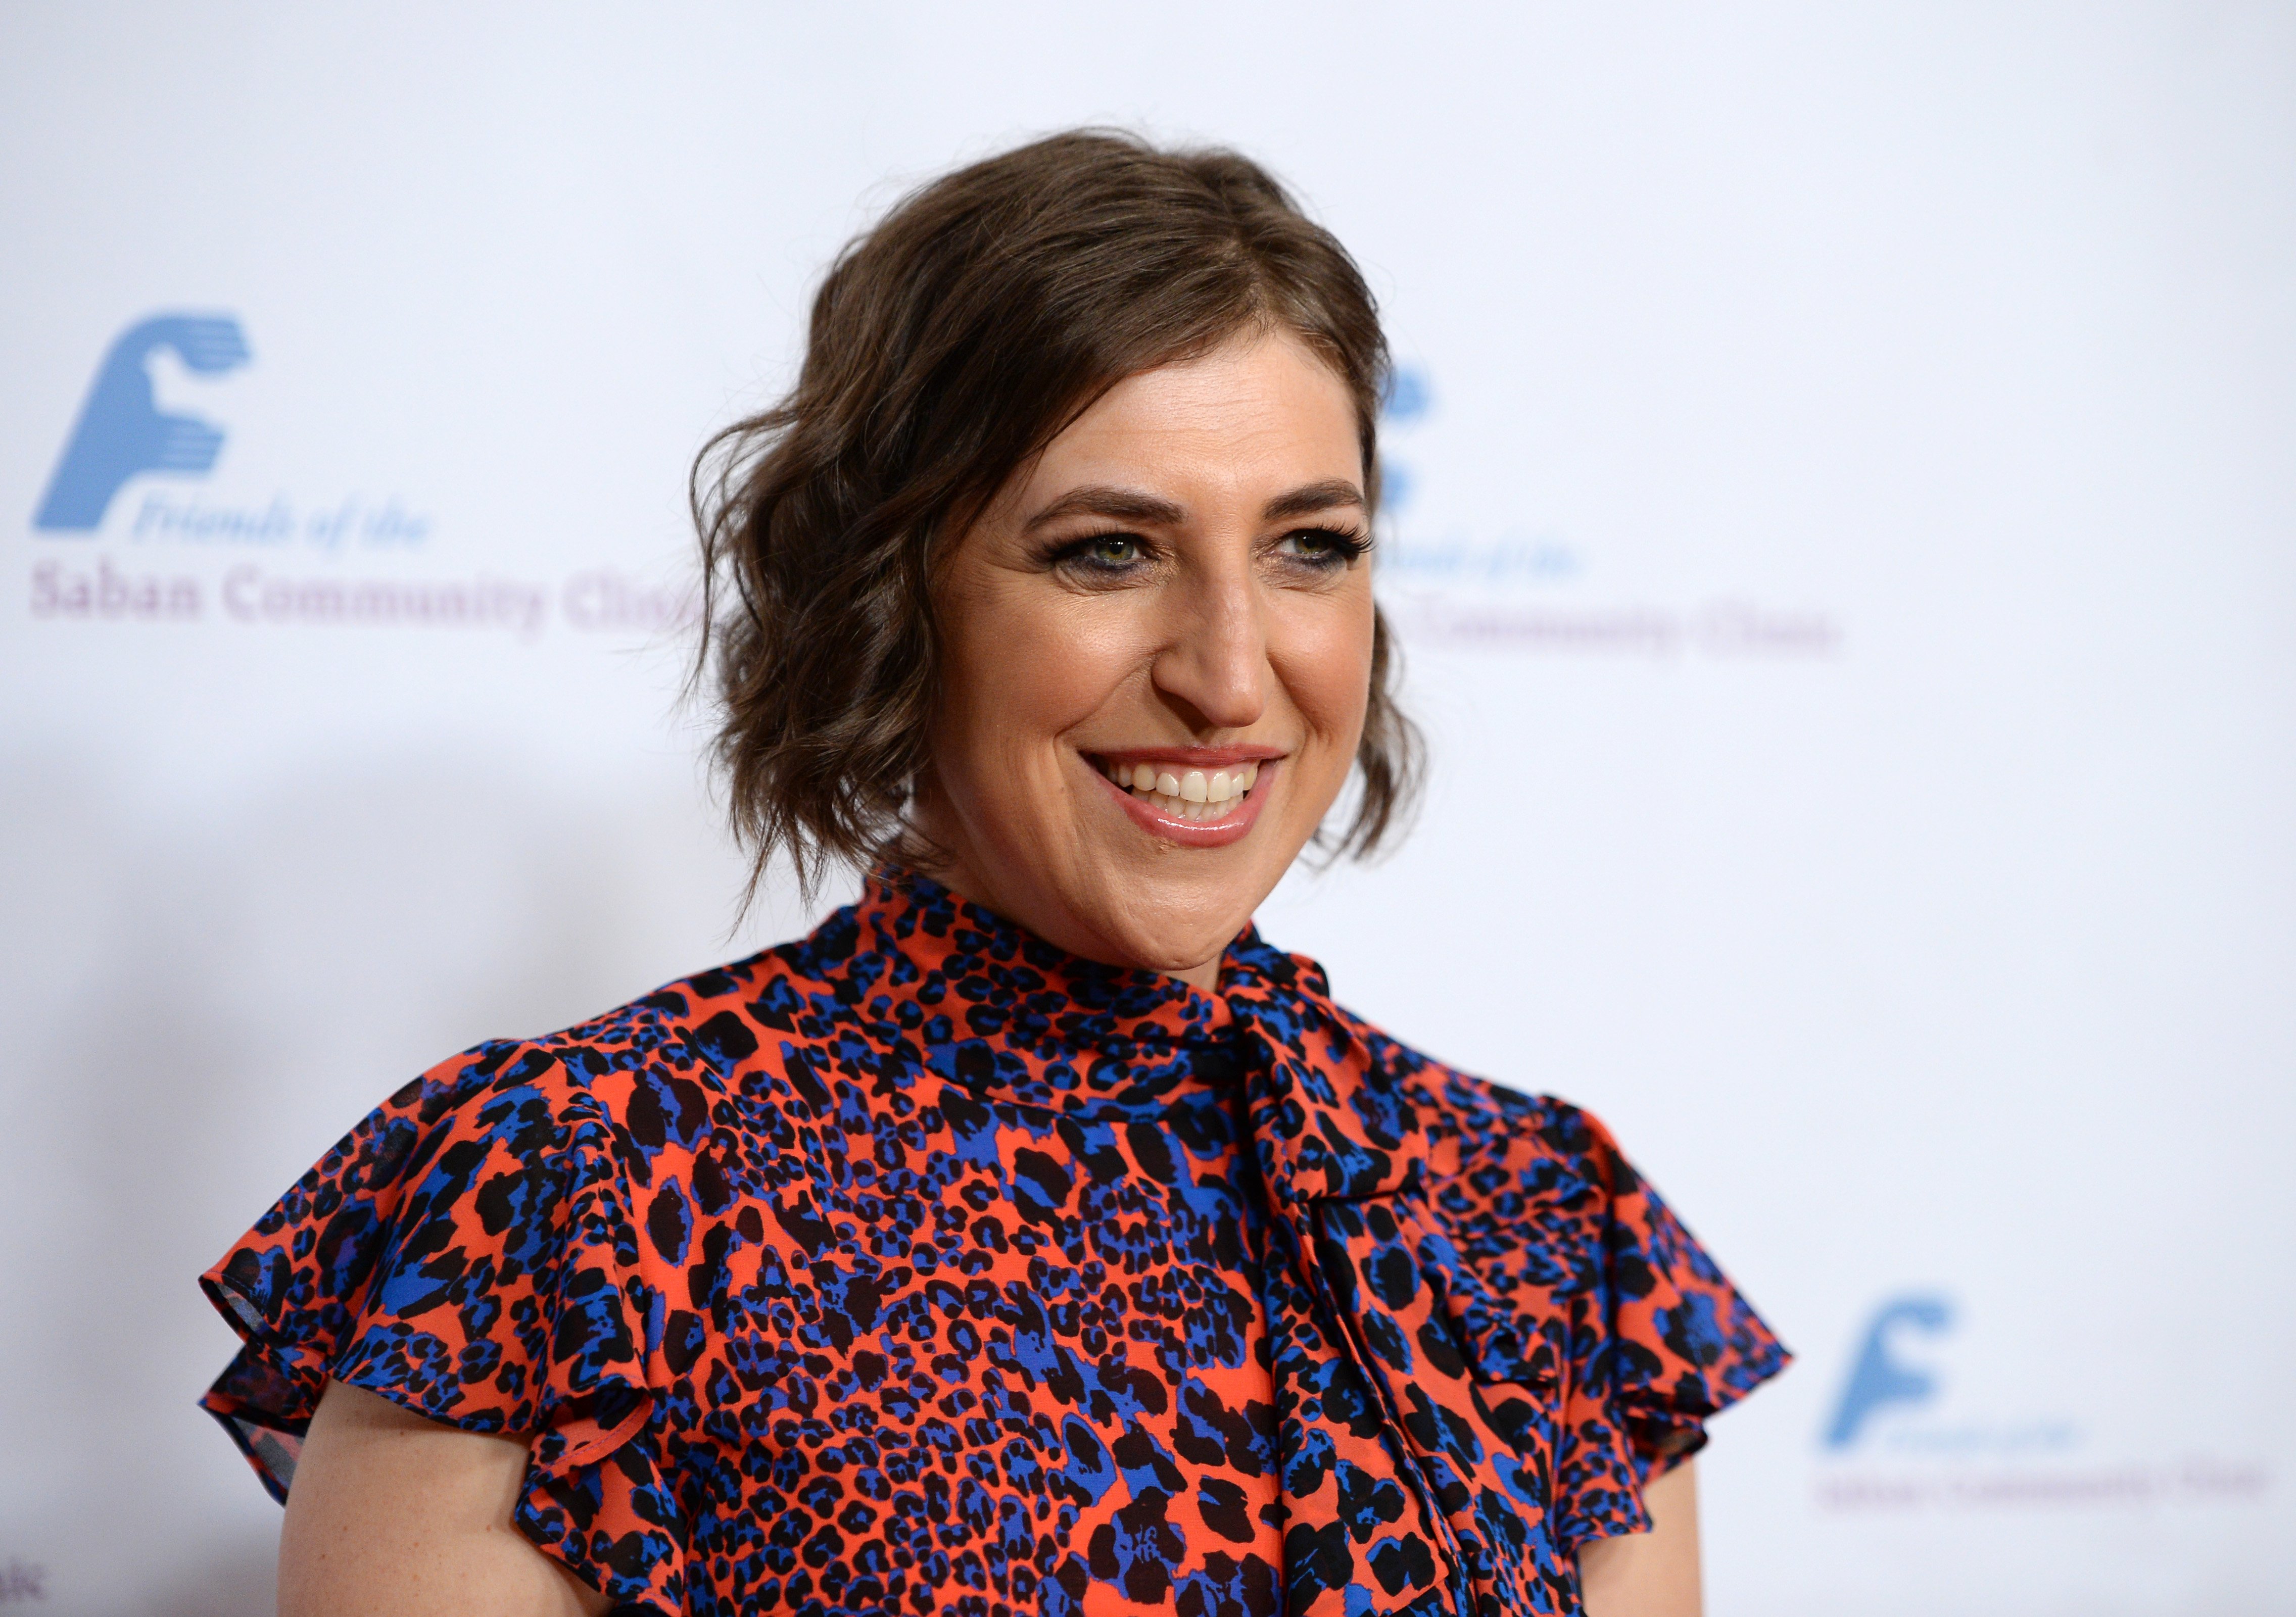 Actress Mayim Bialik arrives at the Saban Community Clinic's 43rd Annual Dinner Gala at The Beverly Hilton Hotel